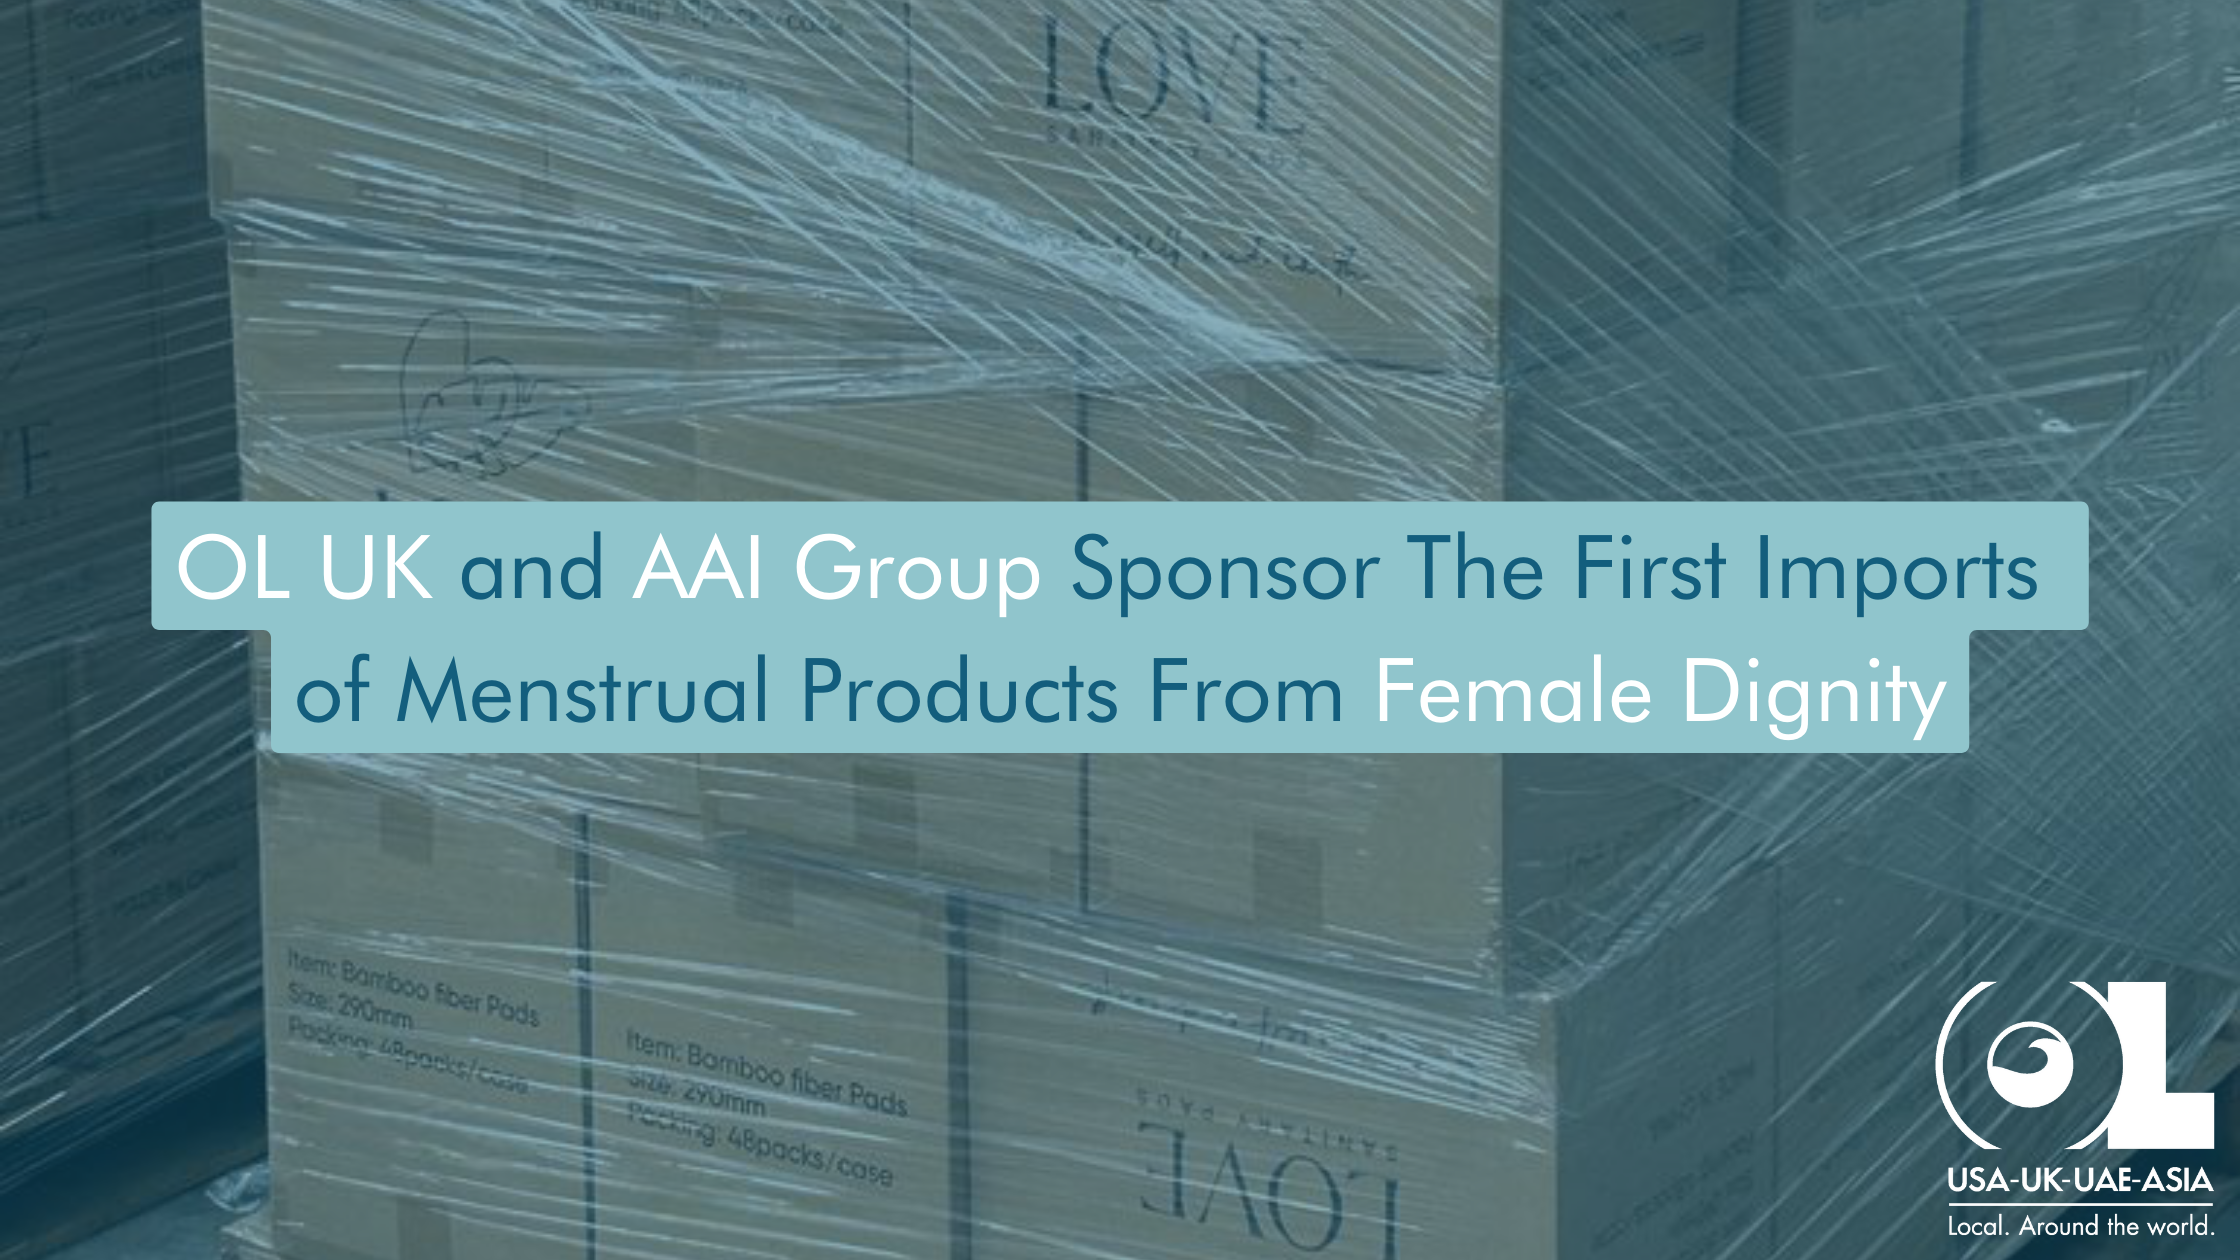 OL-UK-and-AAI-Group-Sponsor-The-First-Imports-of-Menstrual-Products-From-Female-Dignity-OL-USA